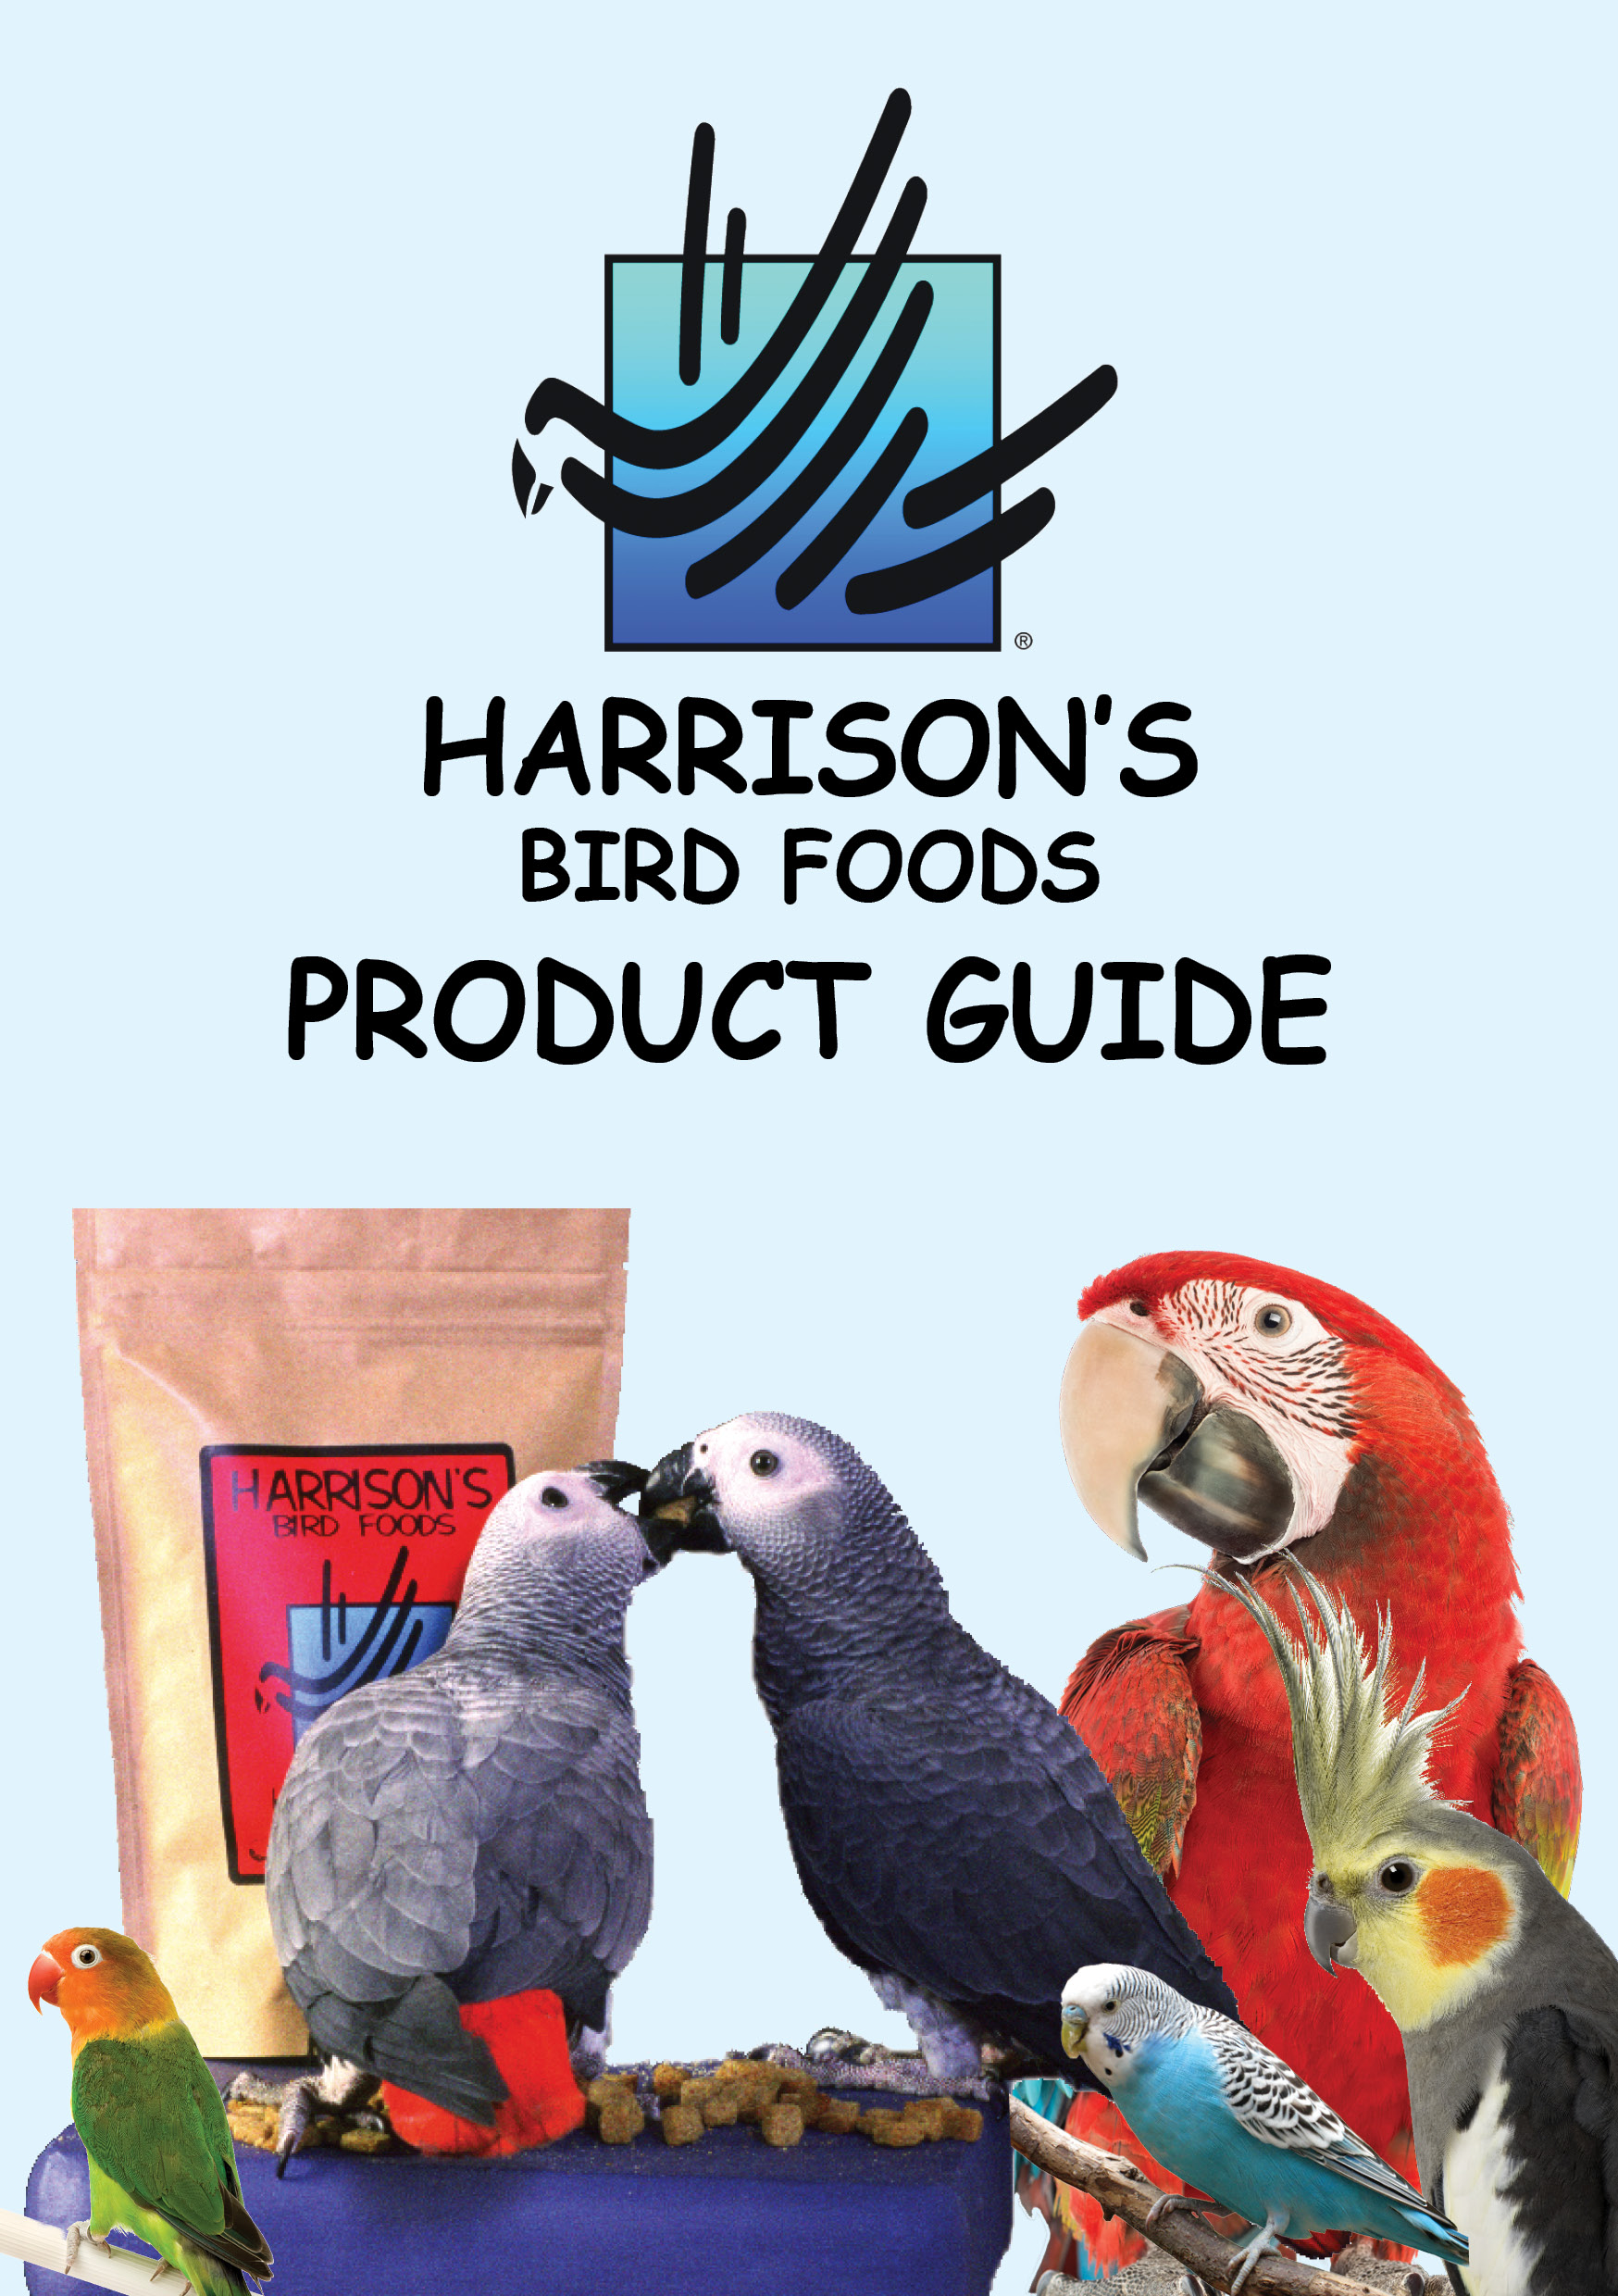 The cover of Harrison's Bird Foods Product Guide